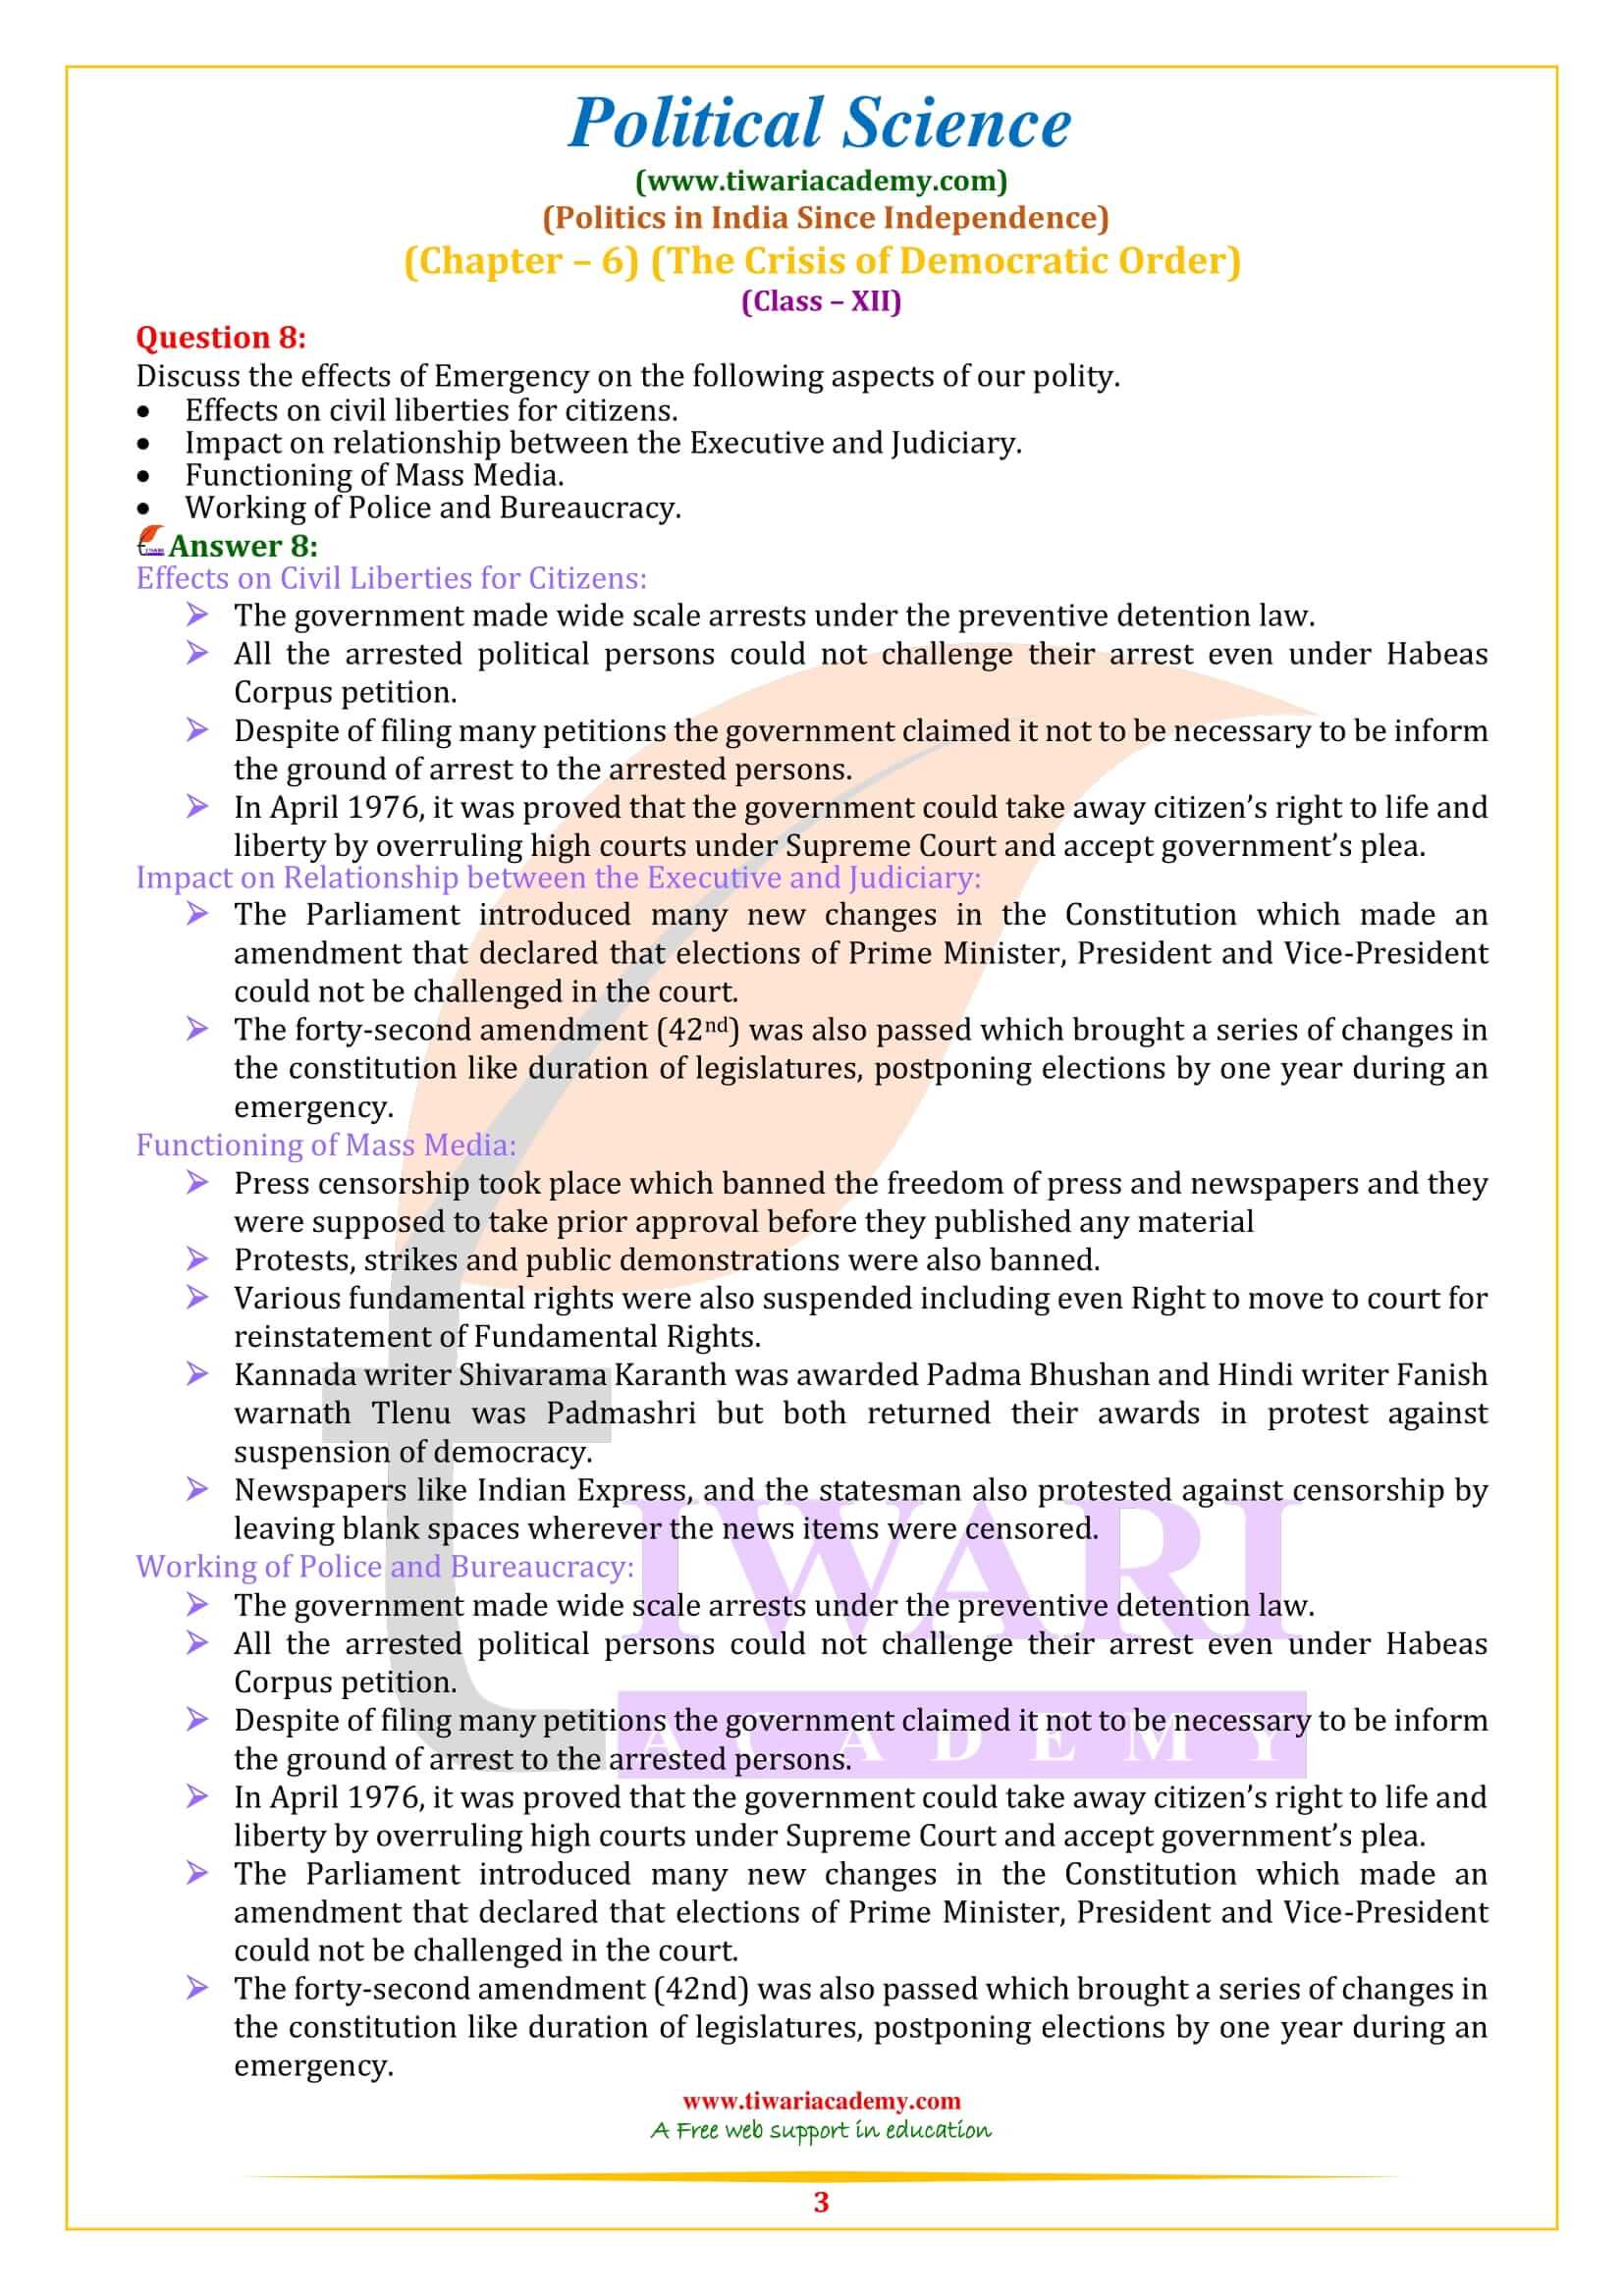 NCERT Solutions for Class 12 Political Science Part 2 Chapter 6 in English Medium